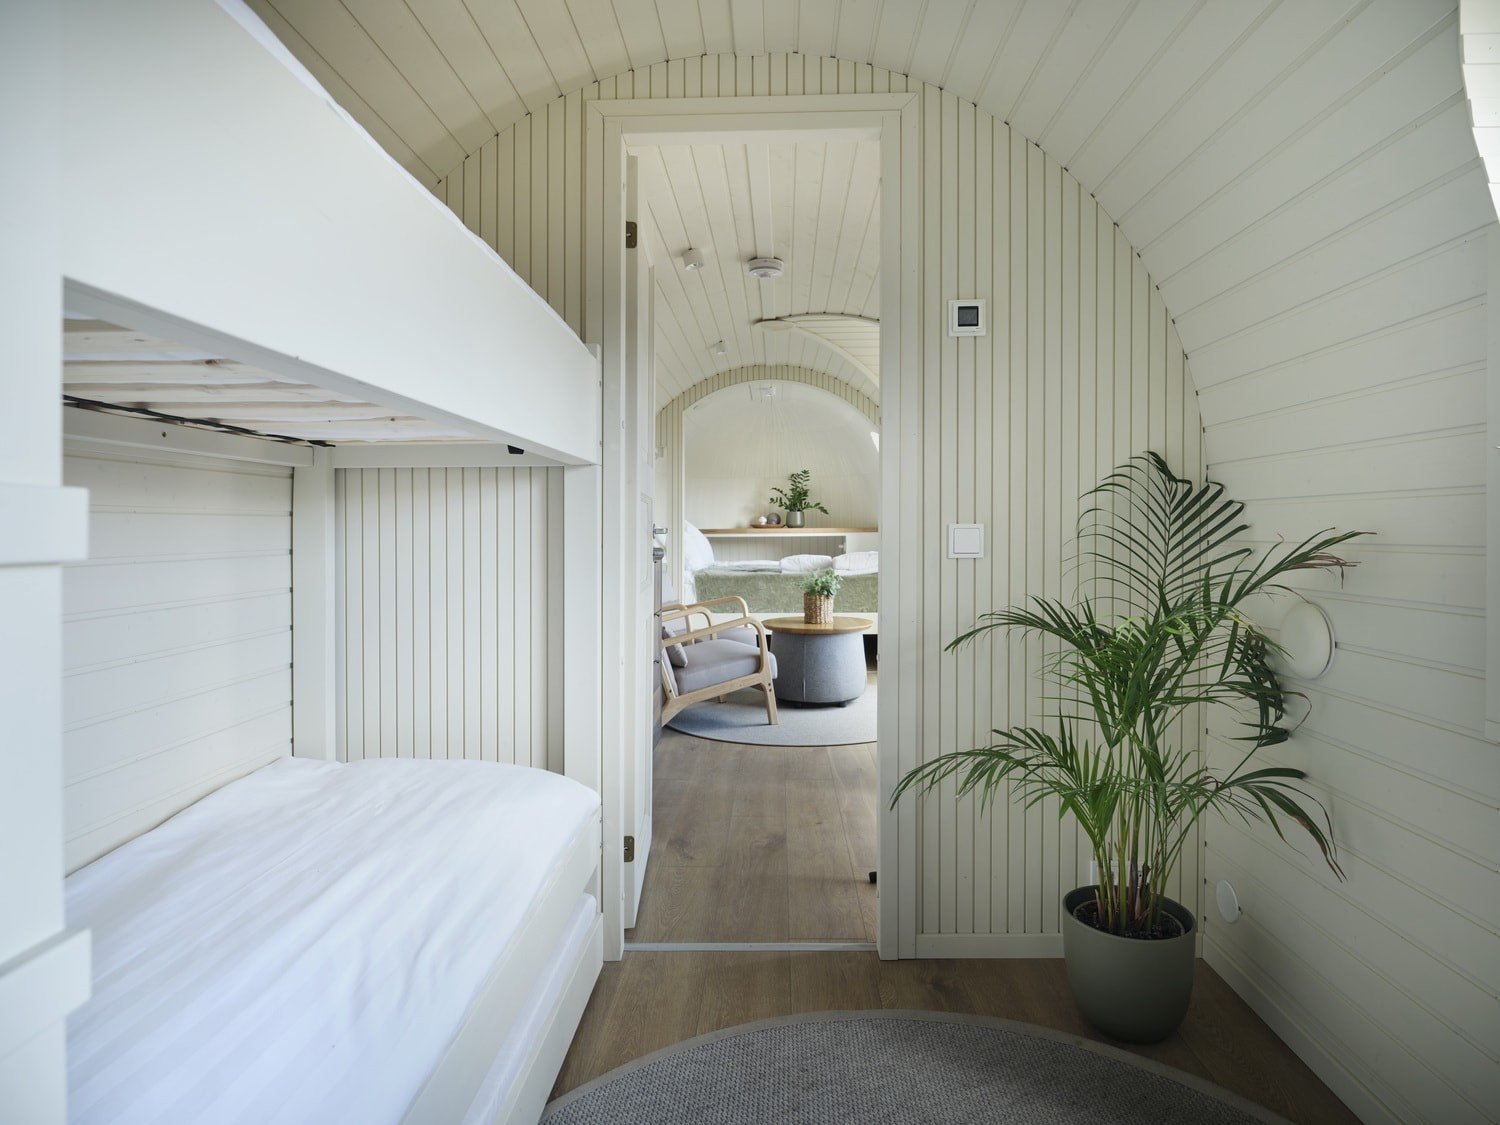 Bunkbeds in a cabin